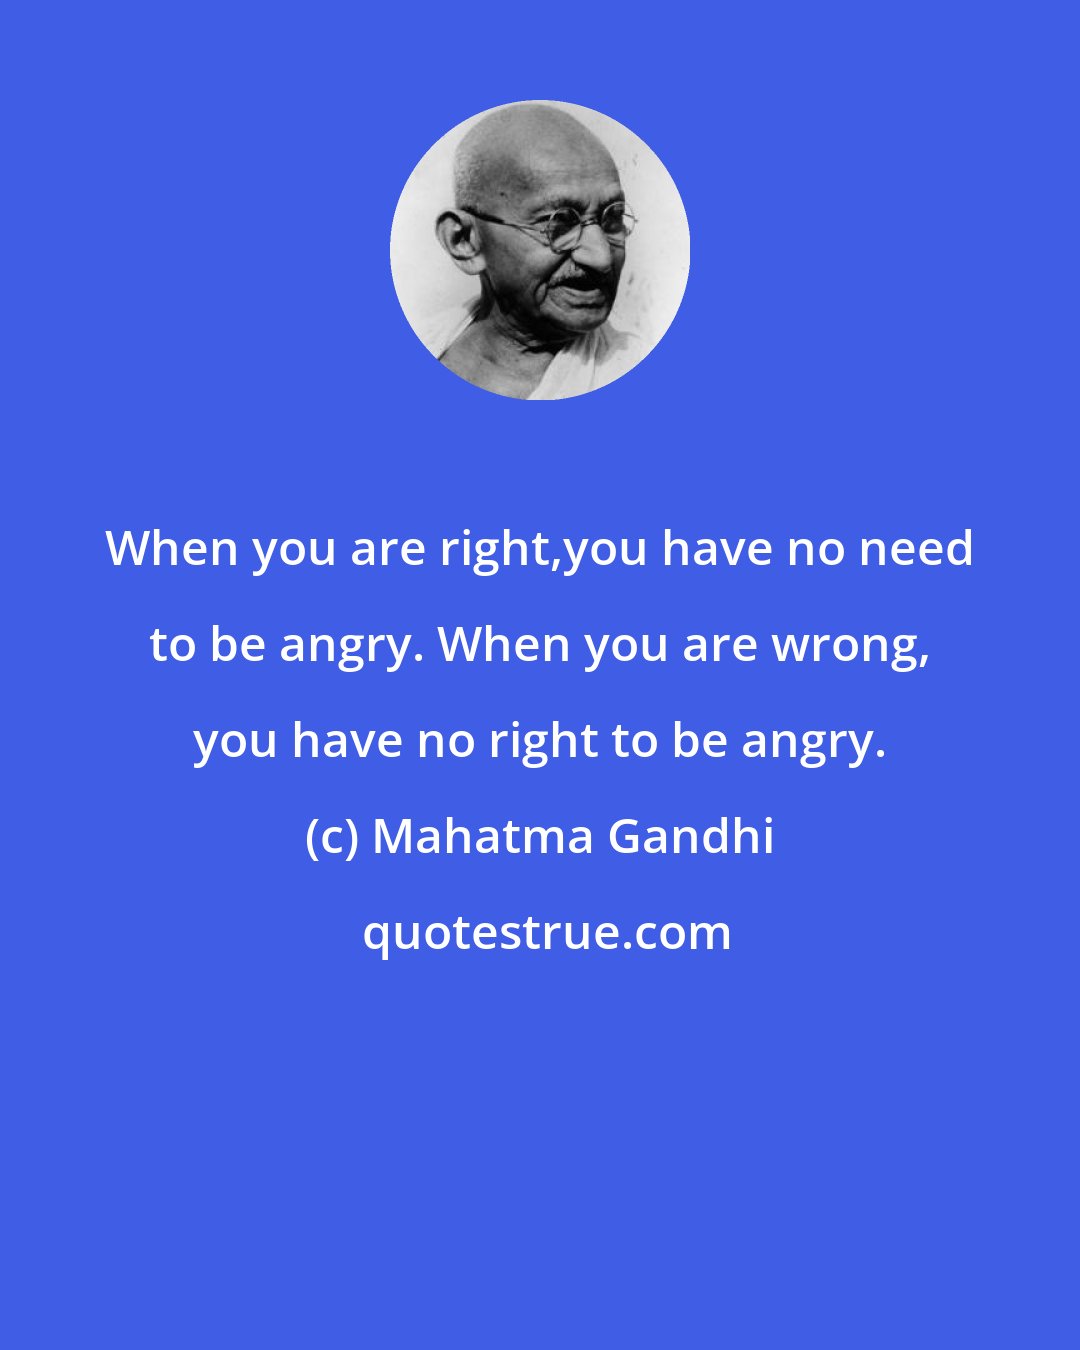 Mahatma Gandhi: When you are right,you have no need to be angry. When you are wrong, you have no right to be angry.